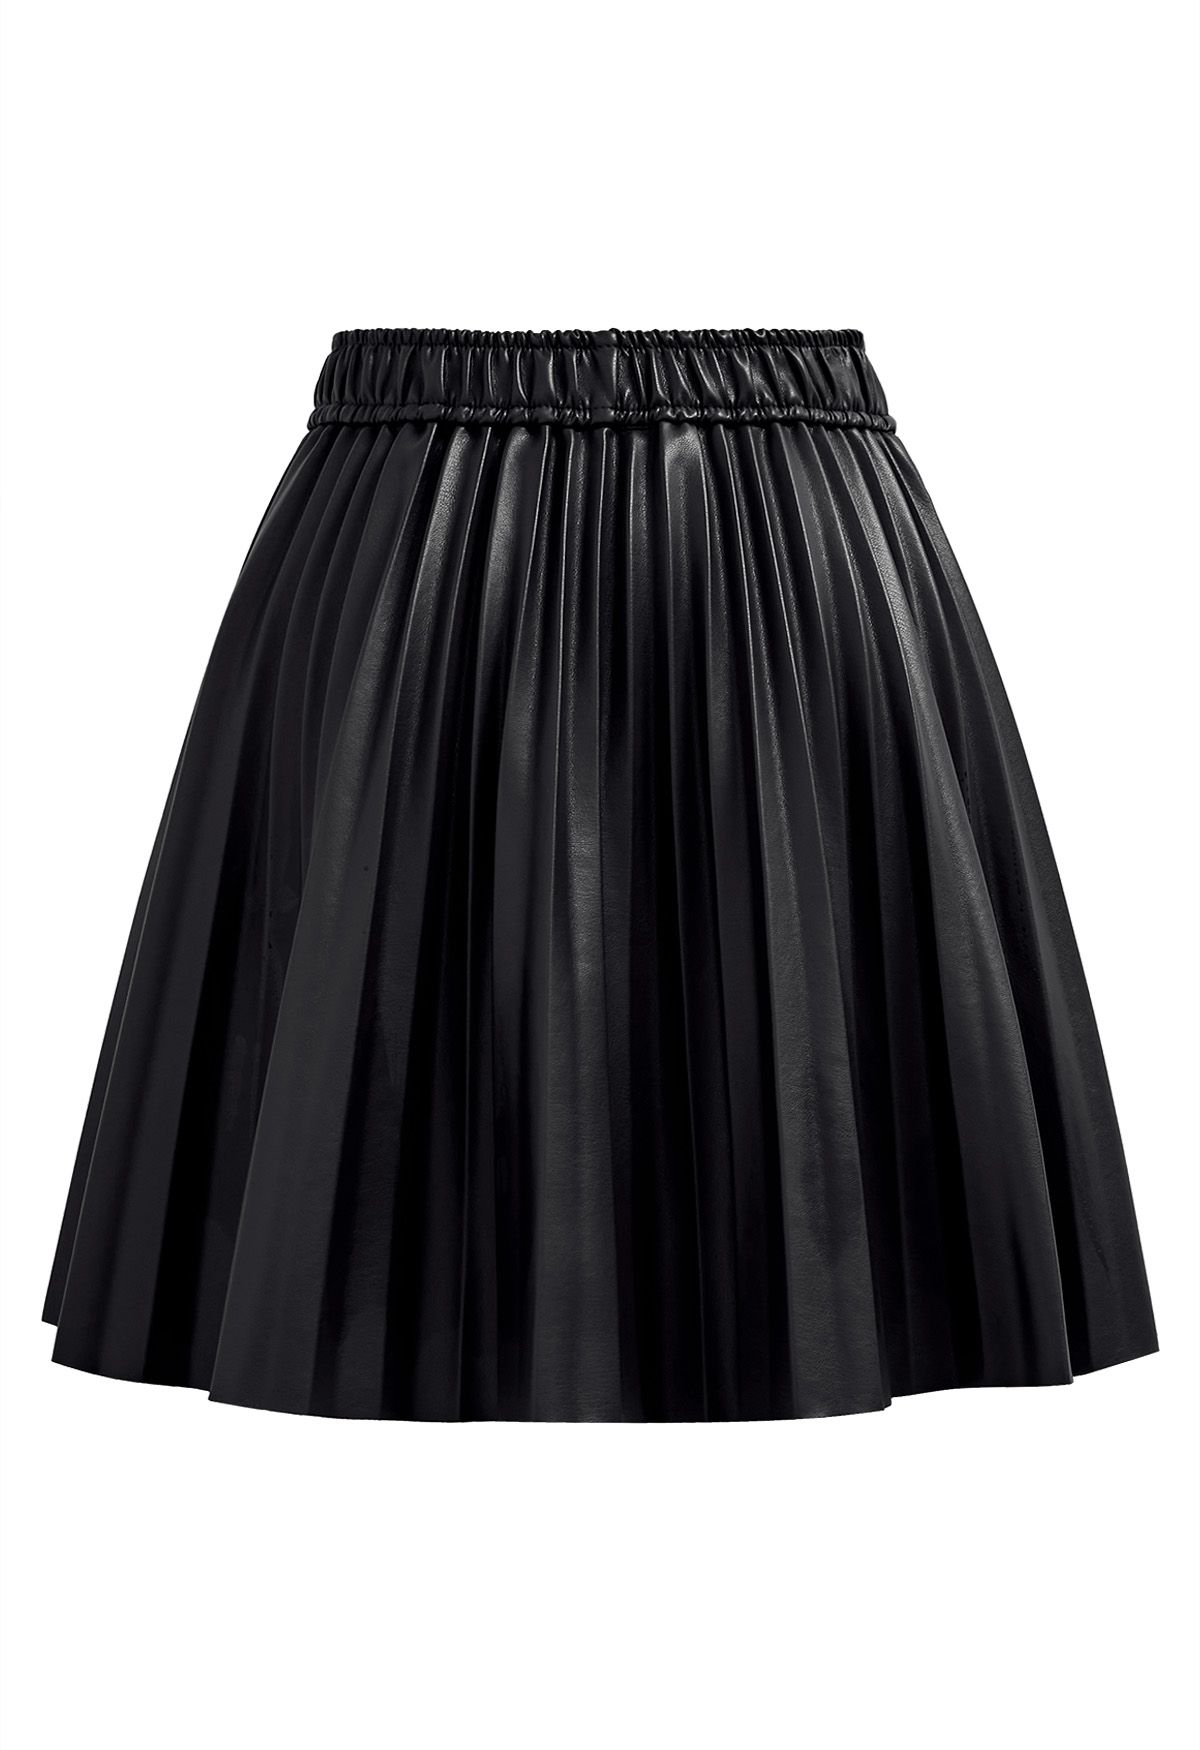 Faux Leather Pleated Mini Skirt in Black - Retro, Indie and Unique Fashion